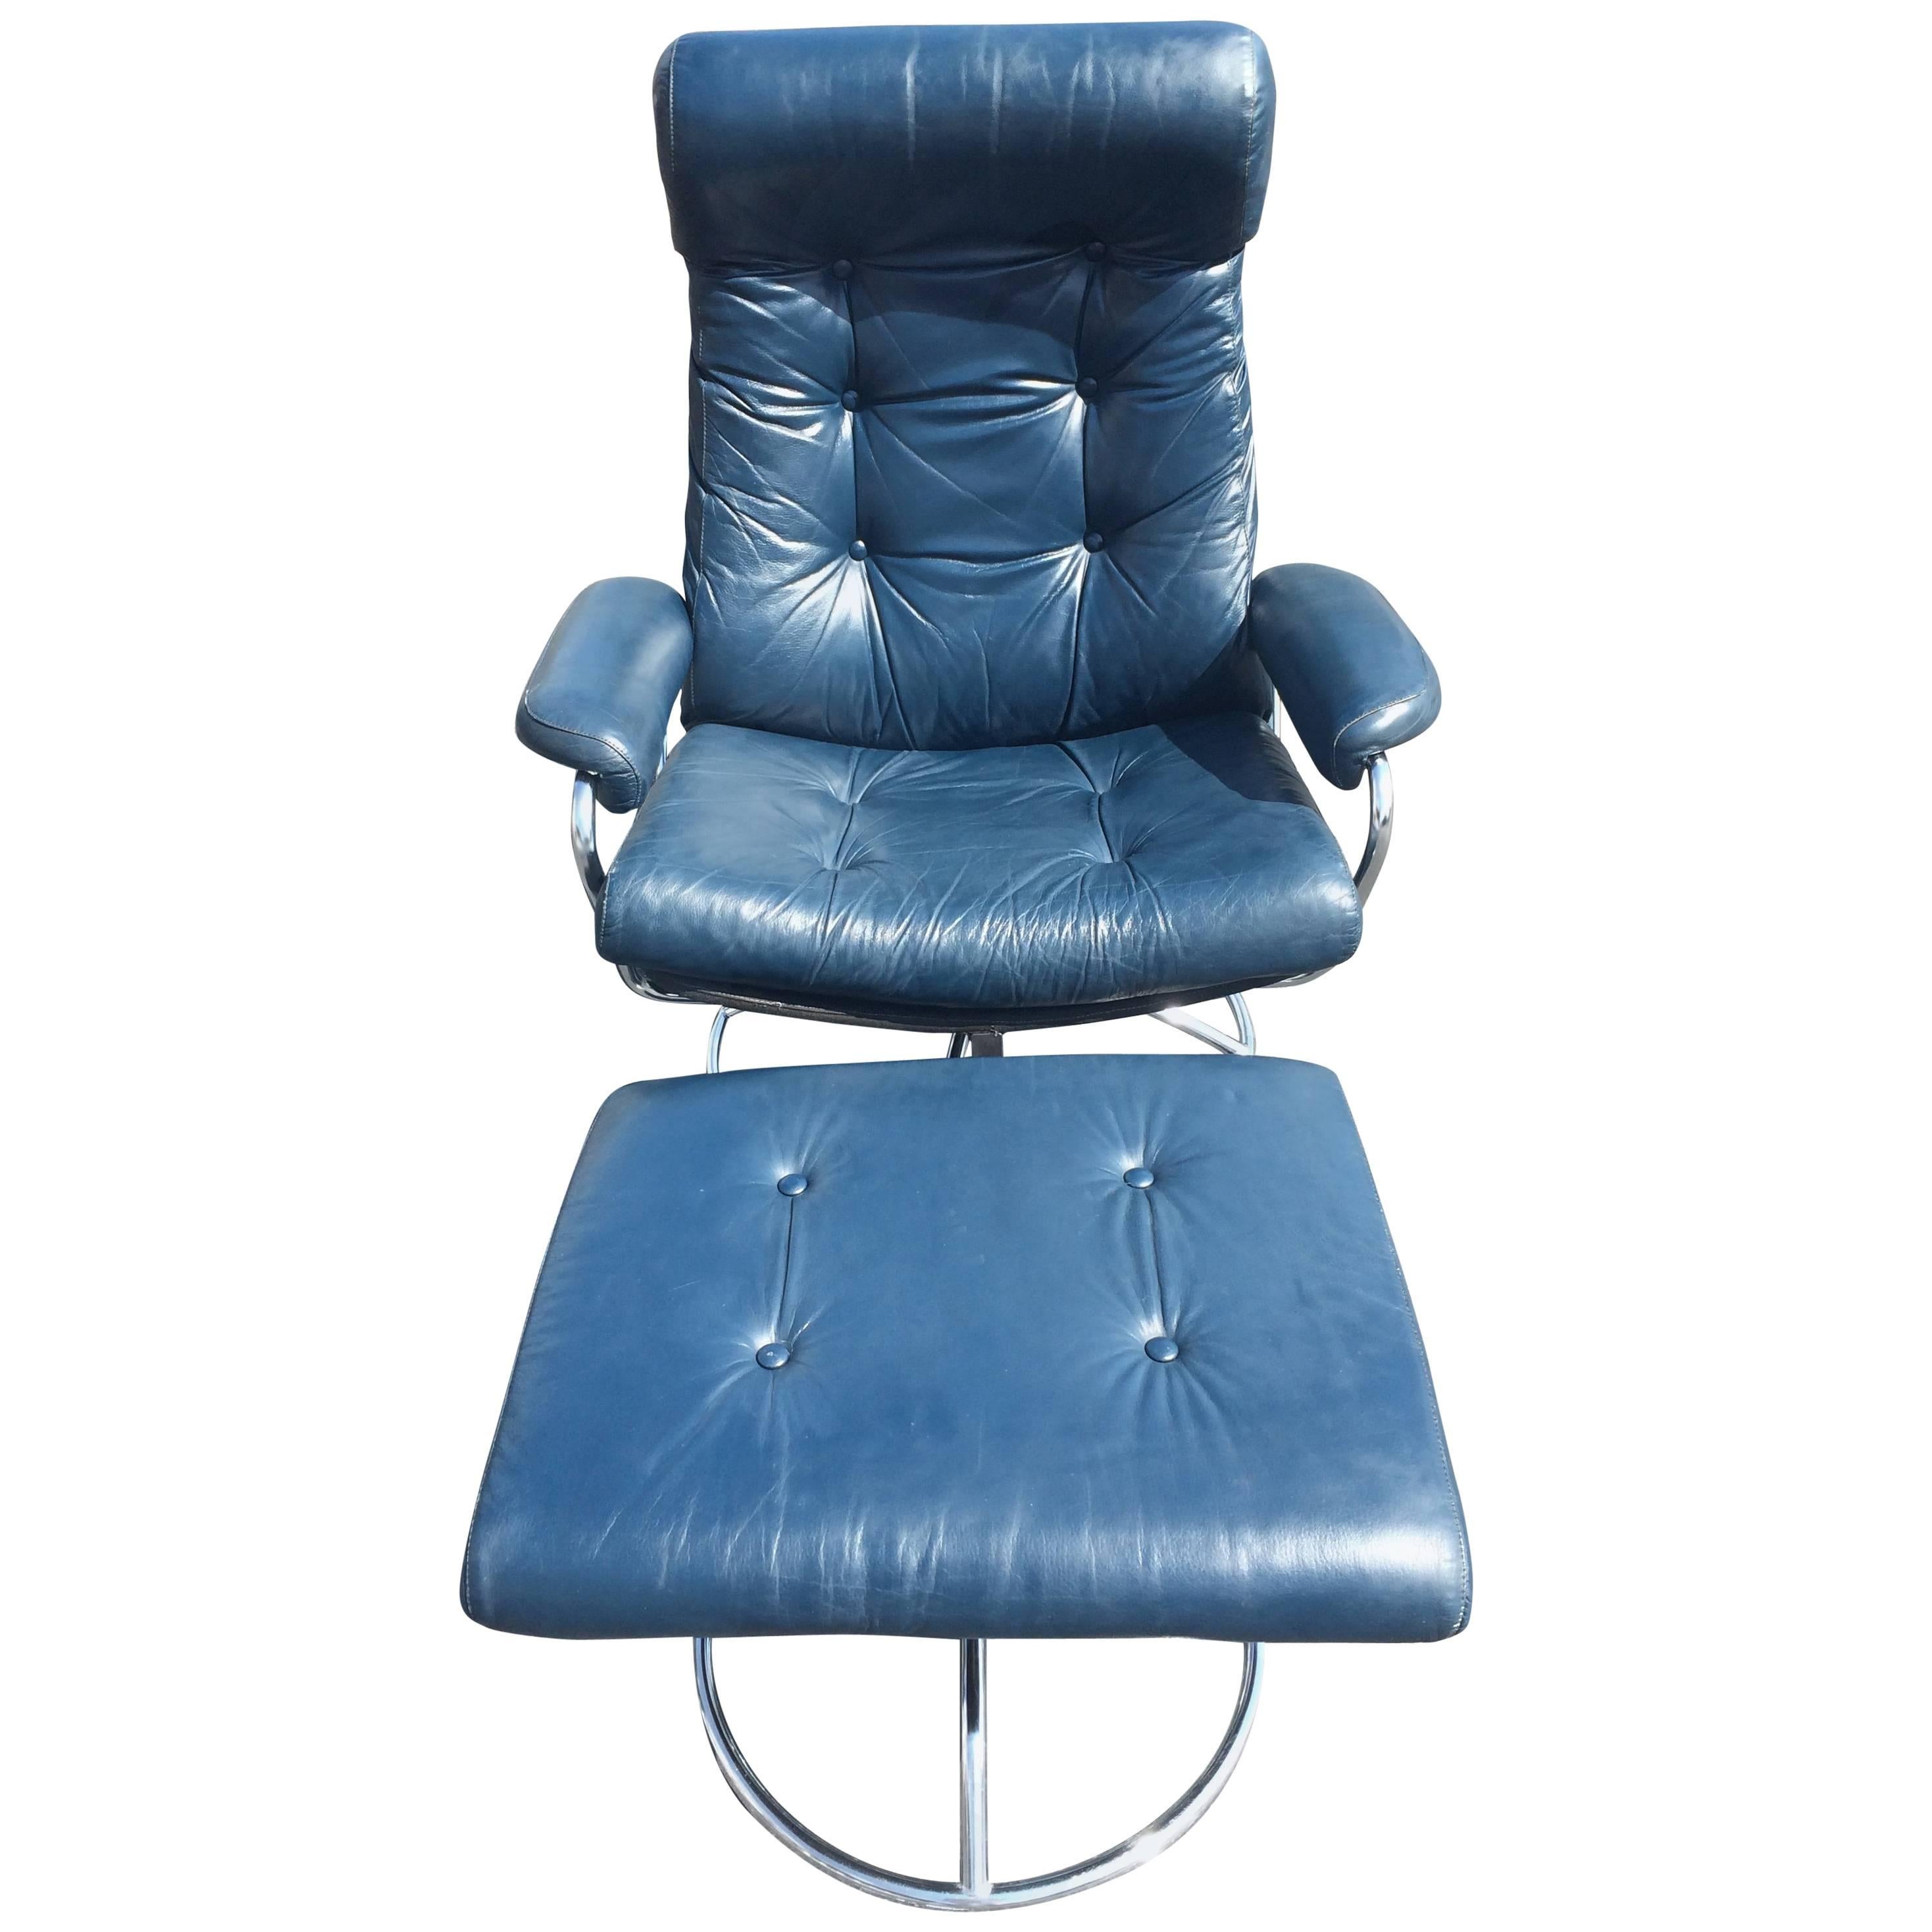  Leather Recliner Lounge Chair and Ottoman in Blue